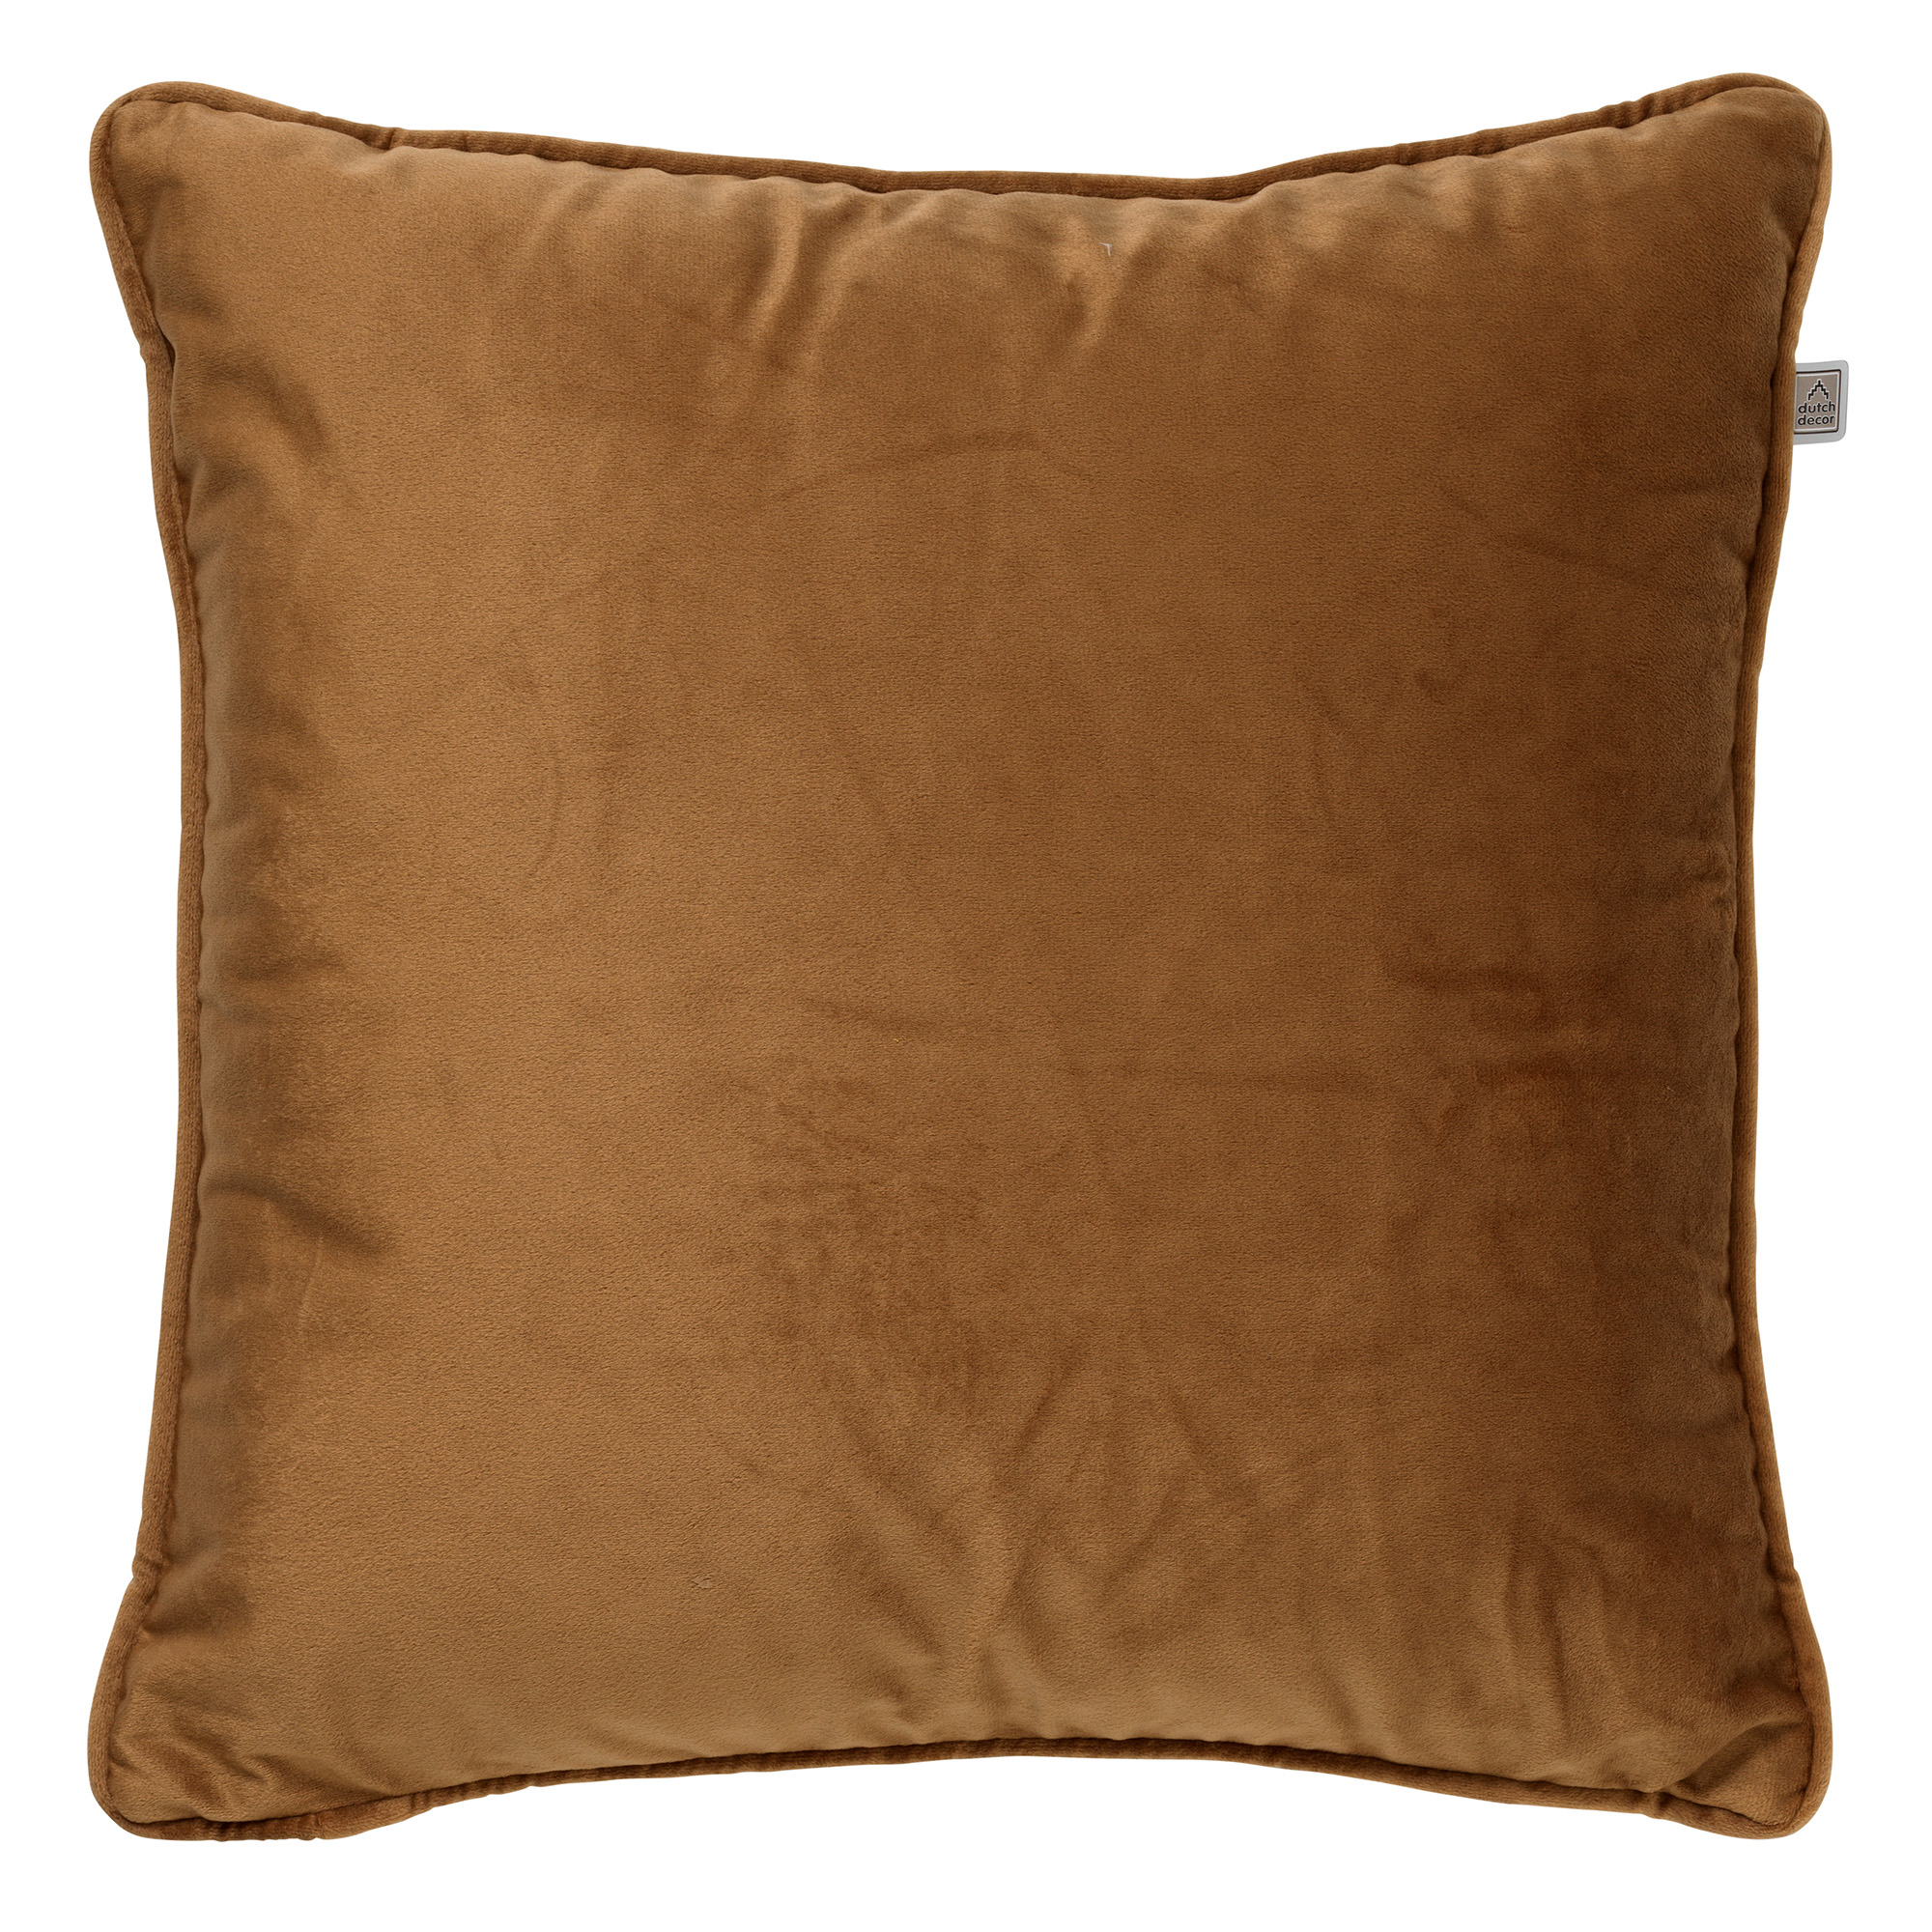 FINNA - Cushion 45x45 cm with cushion cover made of 100% recycled polyester - Eco Line collection - Tobacco Brown - brown